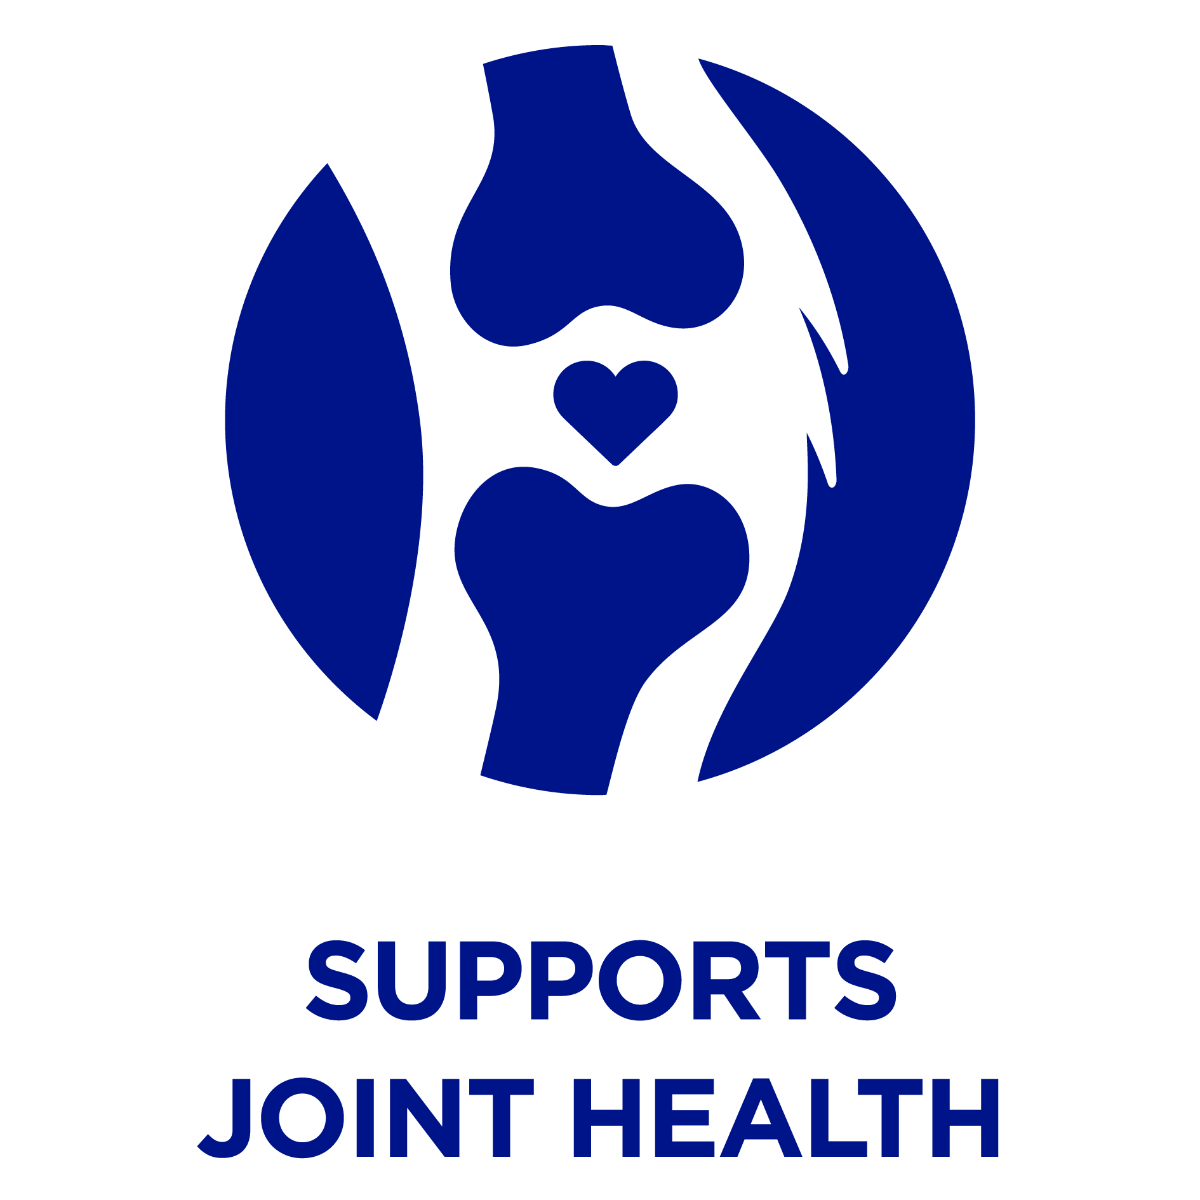 Supports Healthy Joints